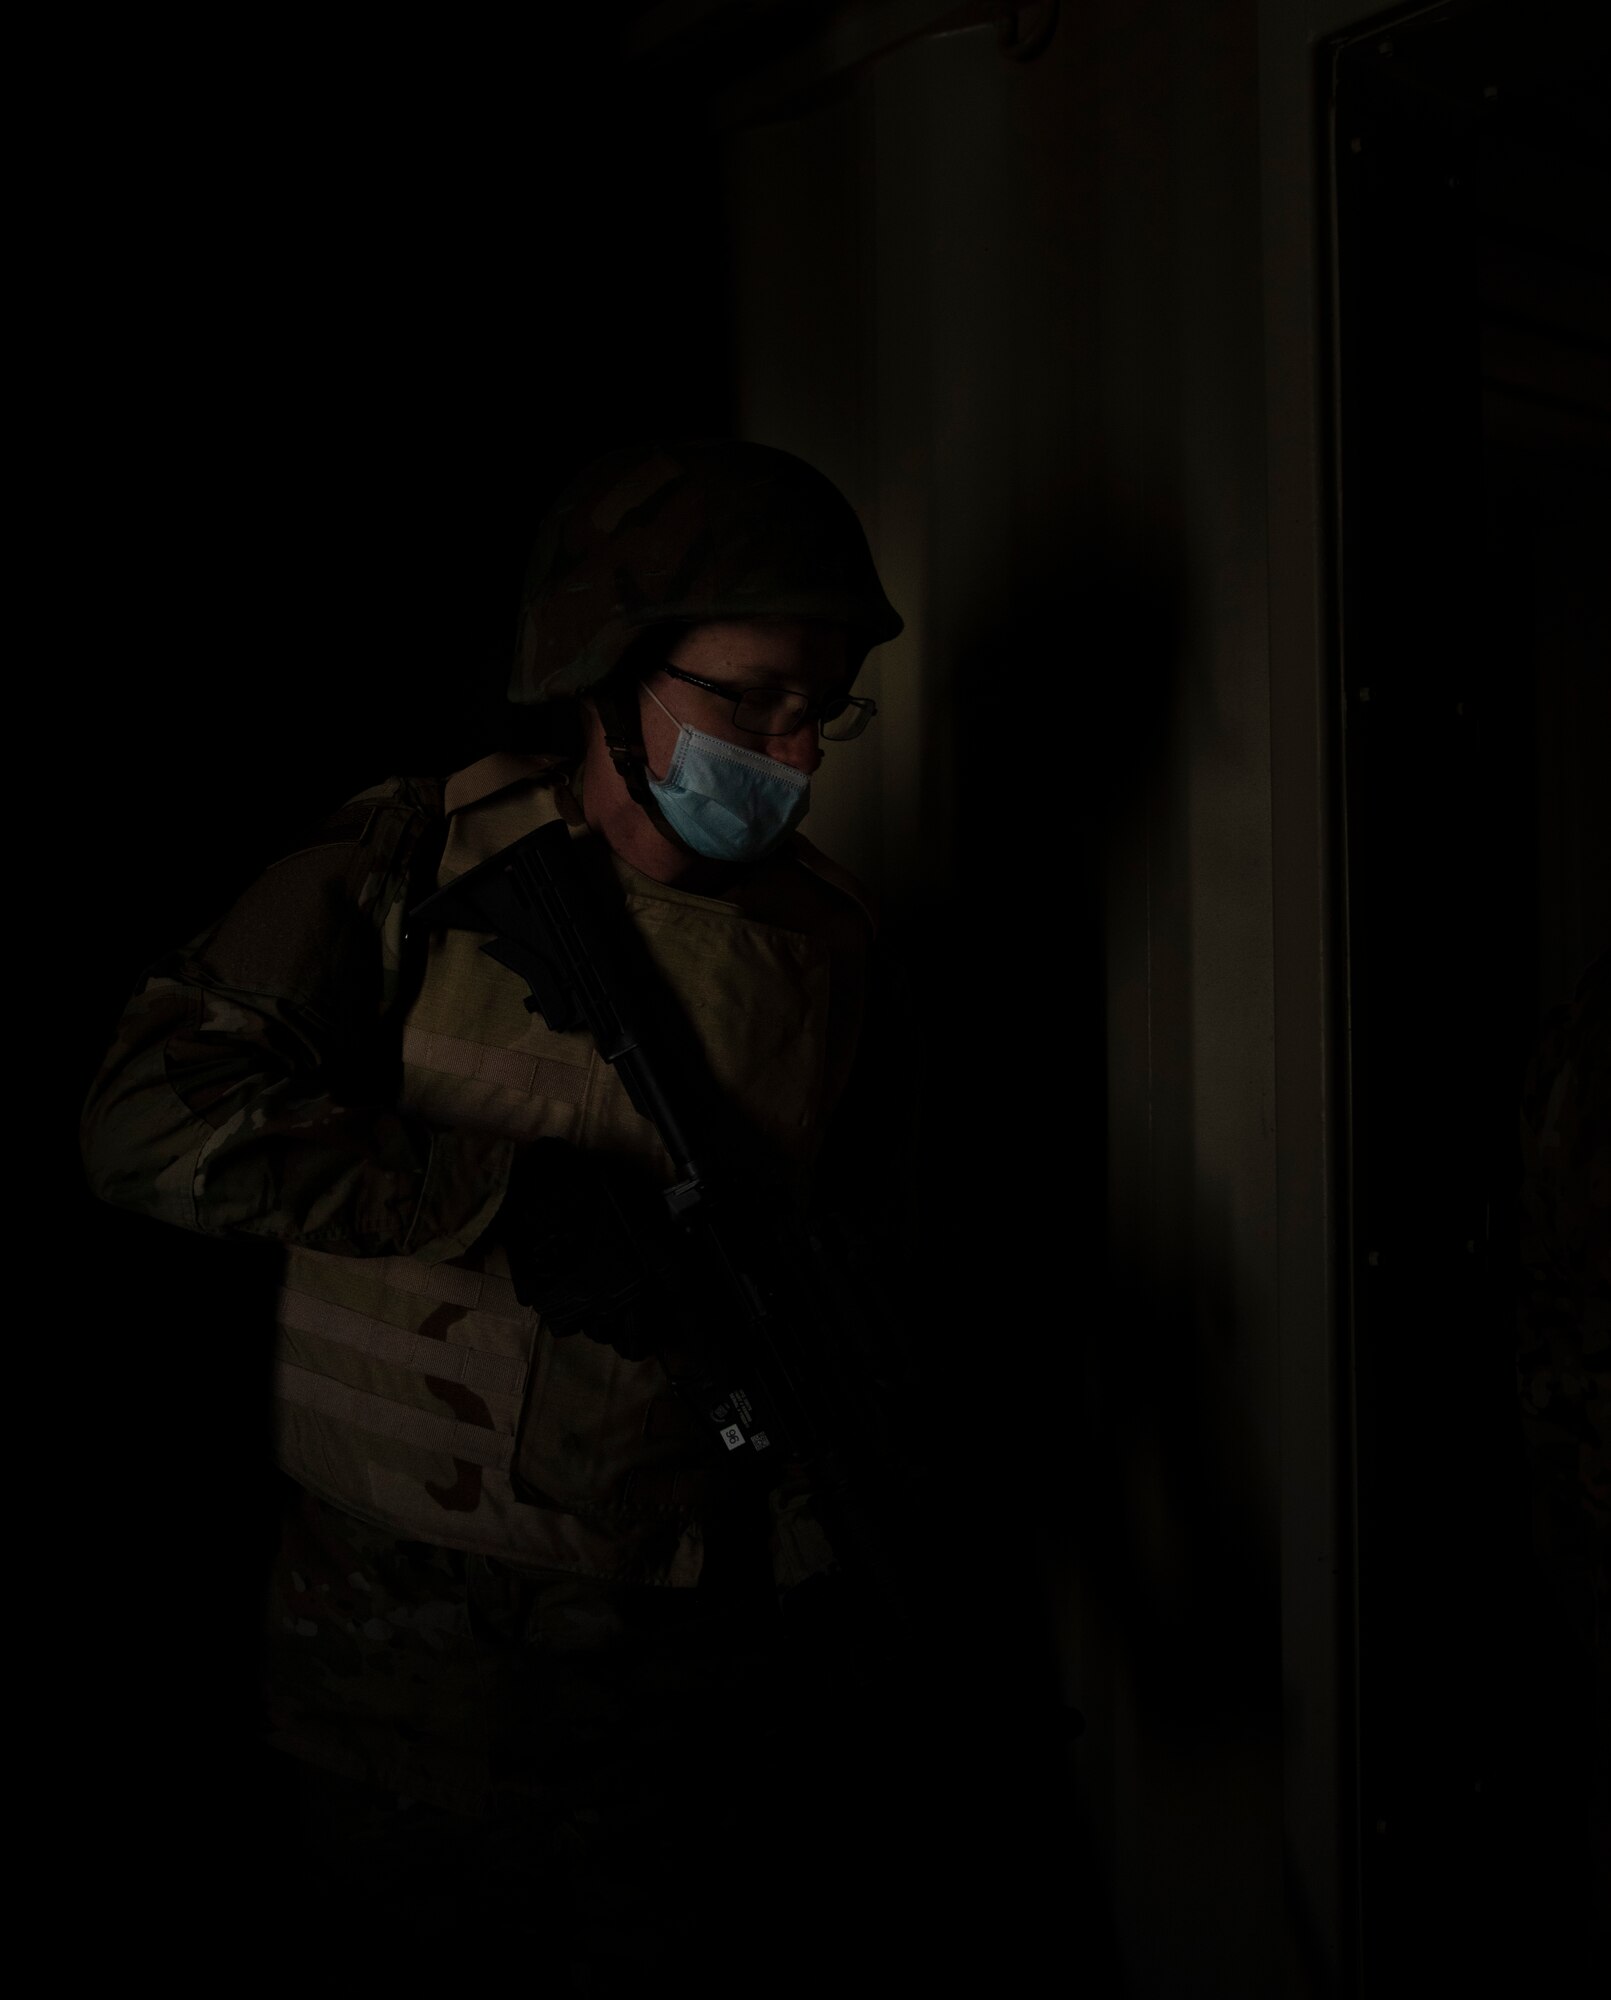 A male Airman stands ready to clear a room during tactical training.